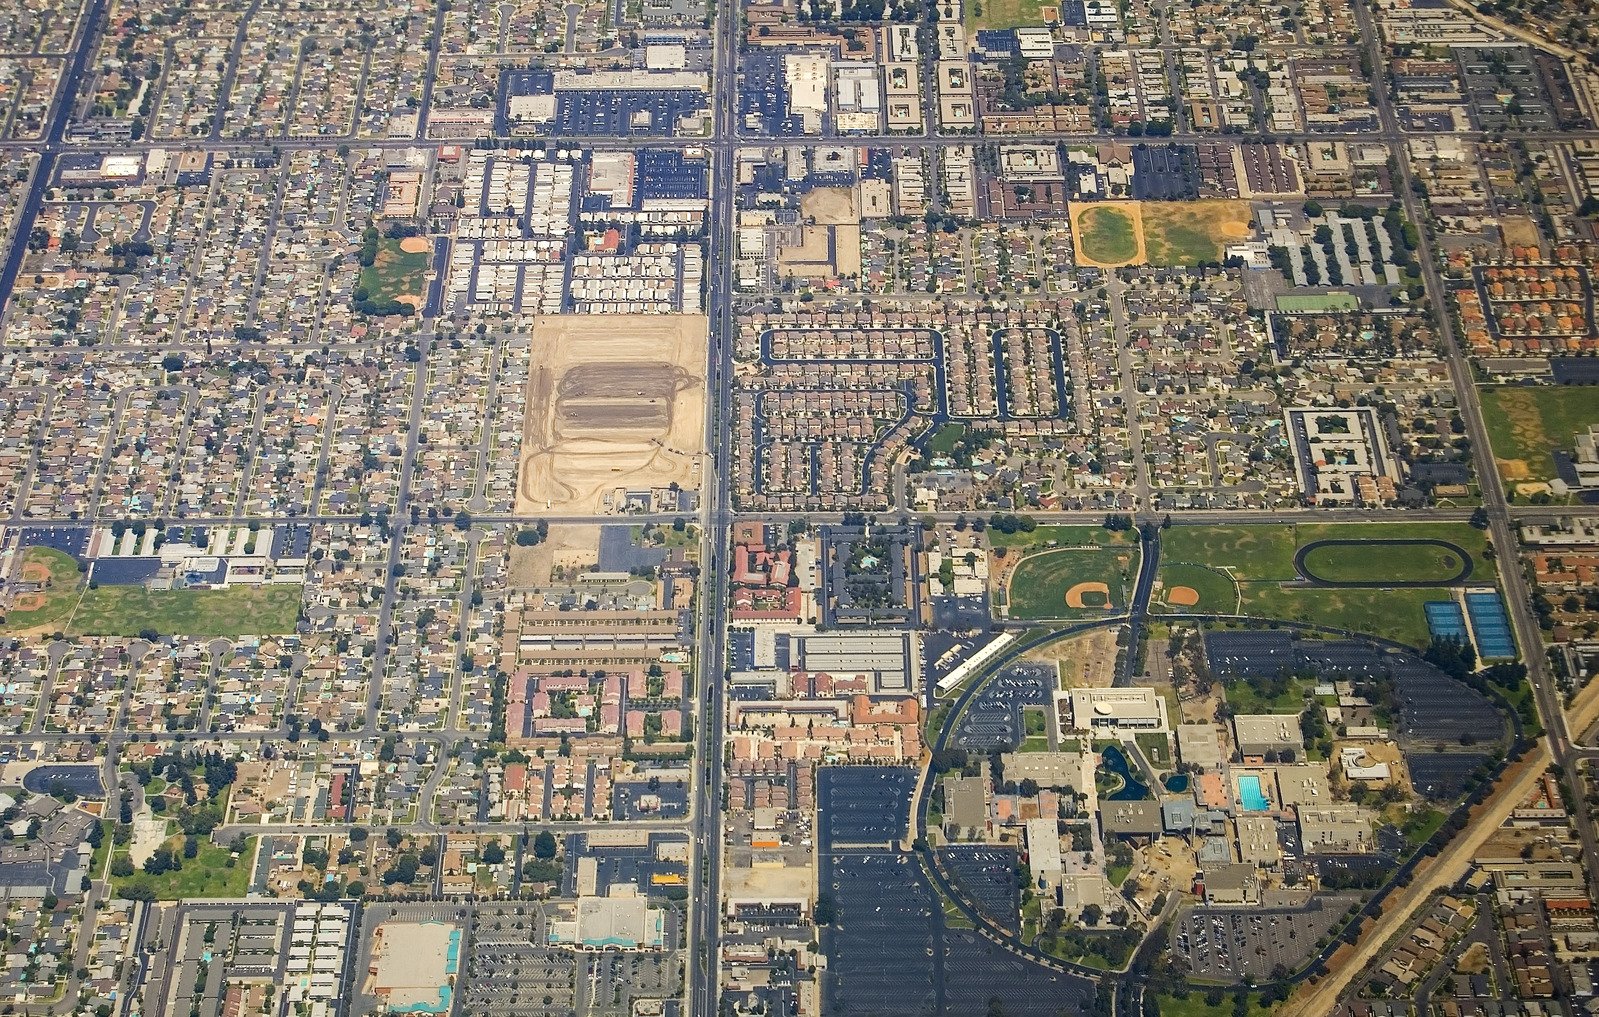 an aerial po of a city with lots of buildings and parking lot areas